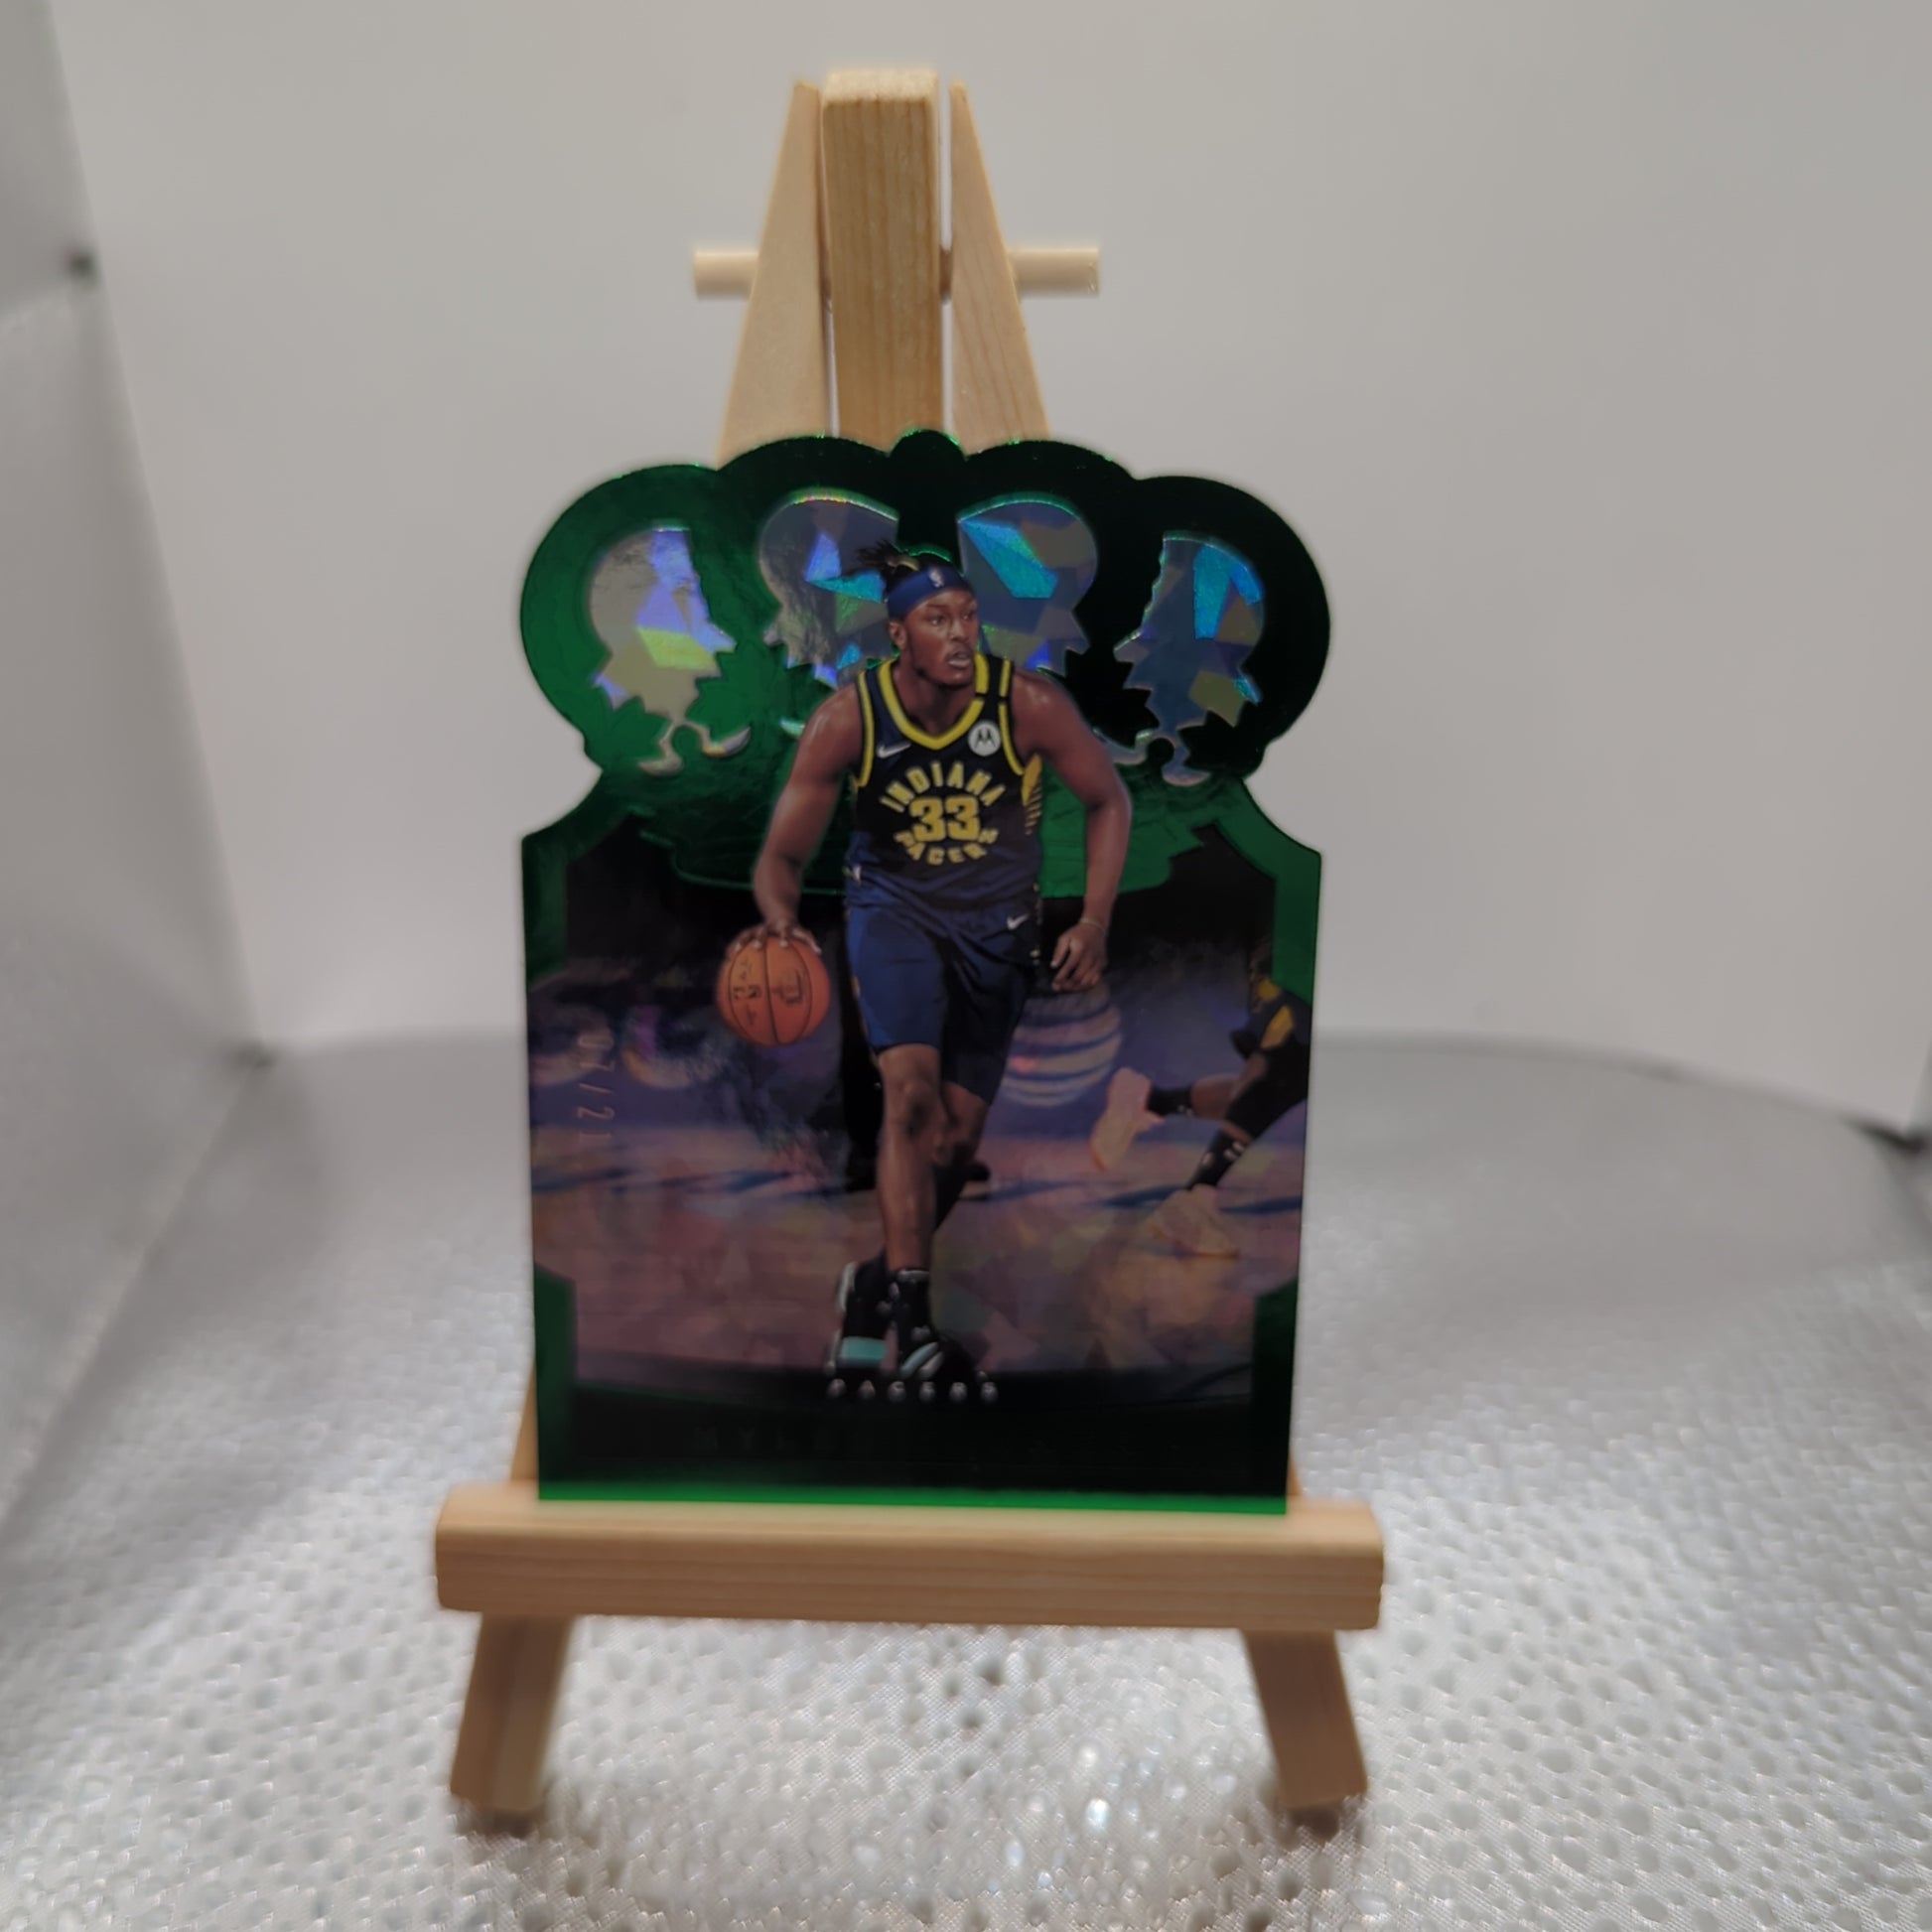 MYLES TURNER 2020-21 PANIN CROWN ROYALE GREEN CRACKED ICE PACERS /21 FRENLY BRICKS - Open 7 Days